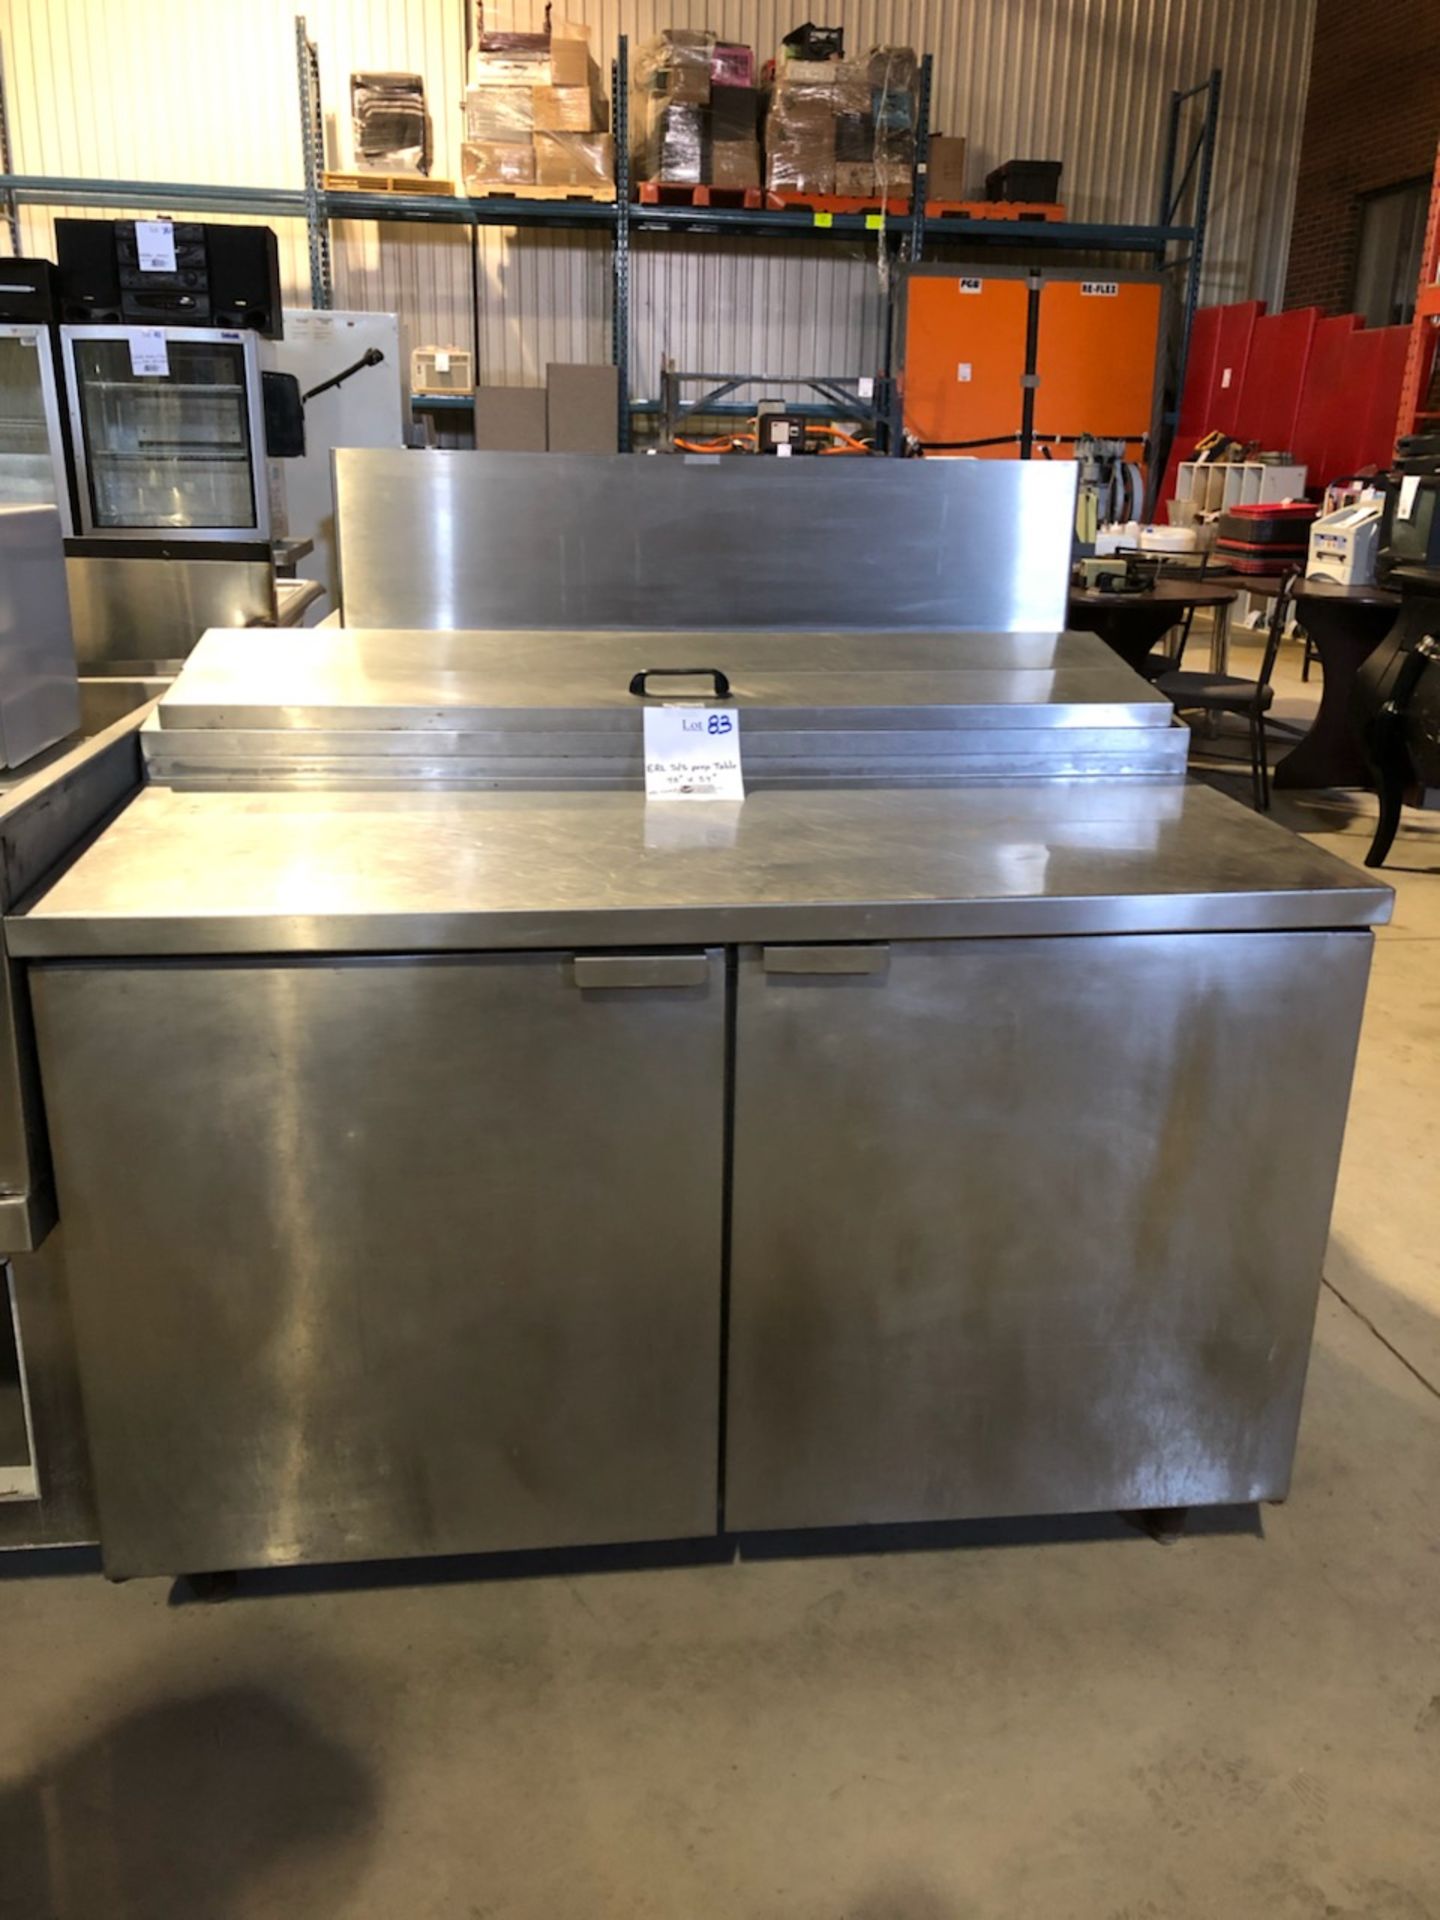 ERL Stainless steel prep table,48"x34",no compressor